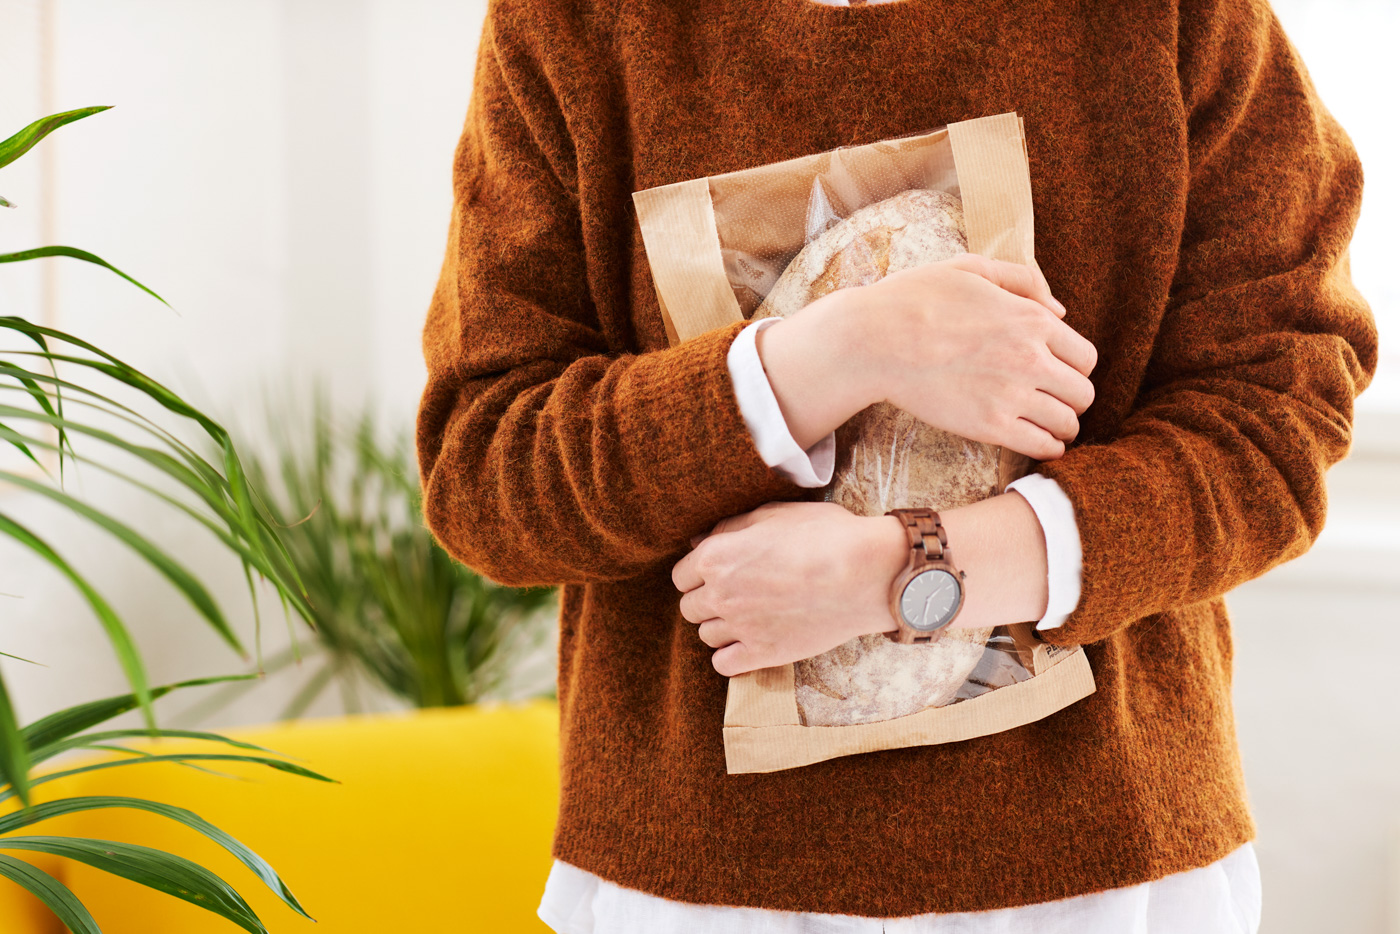 A_woman_with_a_wooden_watch_and_a_brown_orange_knitwear_hugging_a_bread_package_by_Elina_Himanen